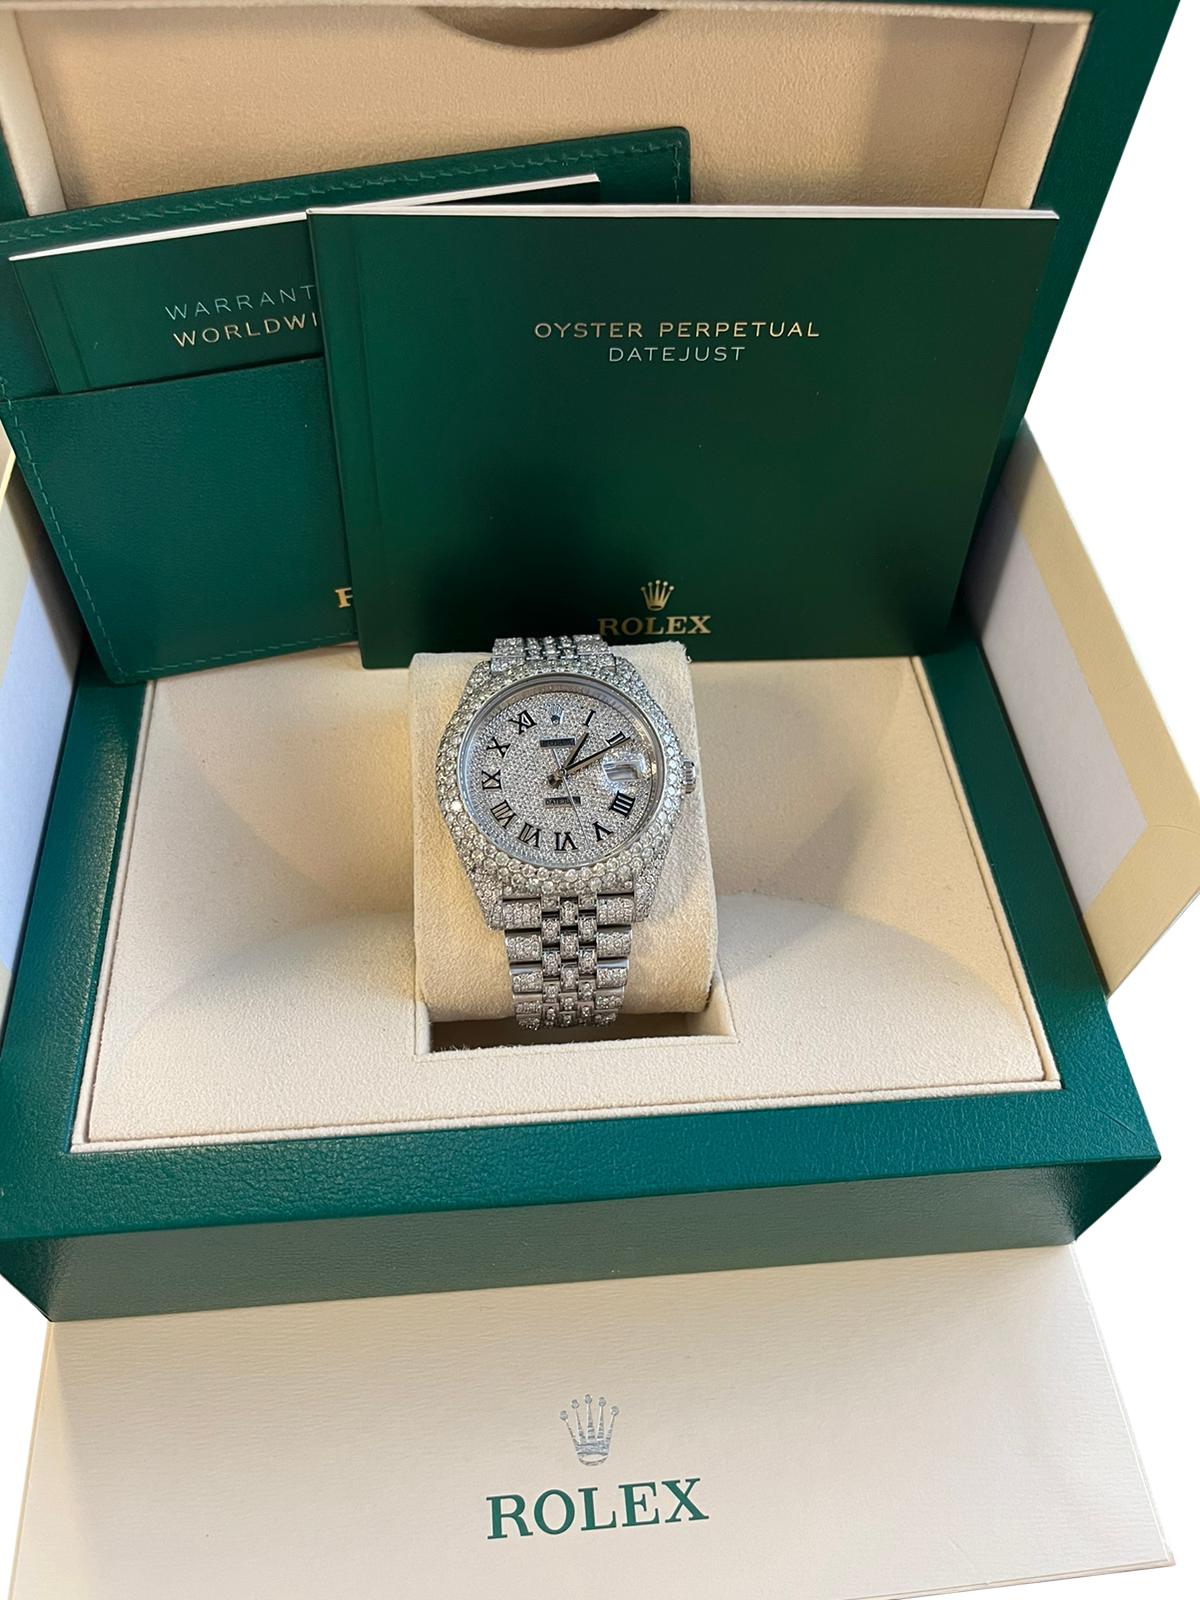 Rolex Datejust 41mm jubilee custom 14.75 carats diamond iced-out watch, is a true embodiment of timeless elegance and luxurious sophistication. This watch is beautifully curated using an exceptional quality of Aftermarket diamonds. Crafted to the